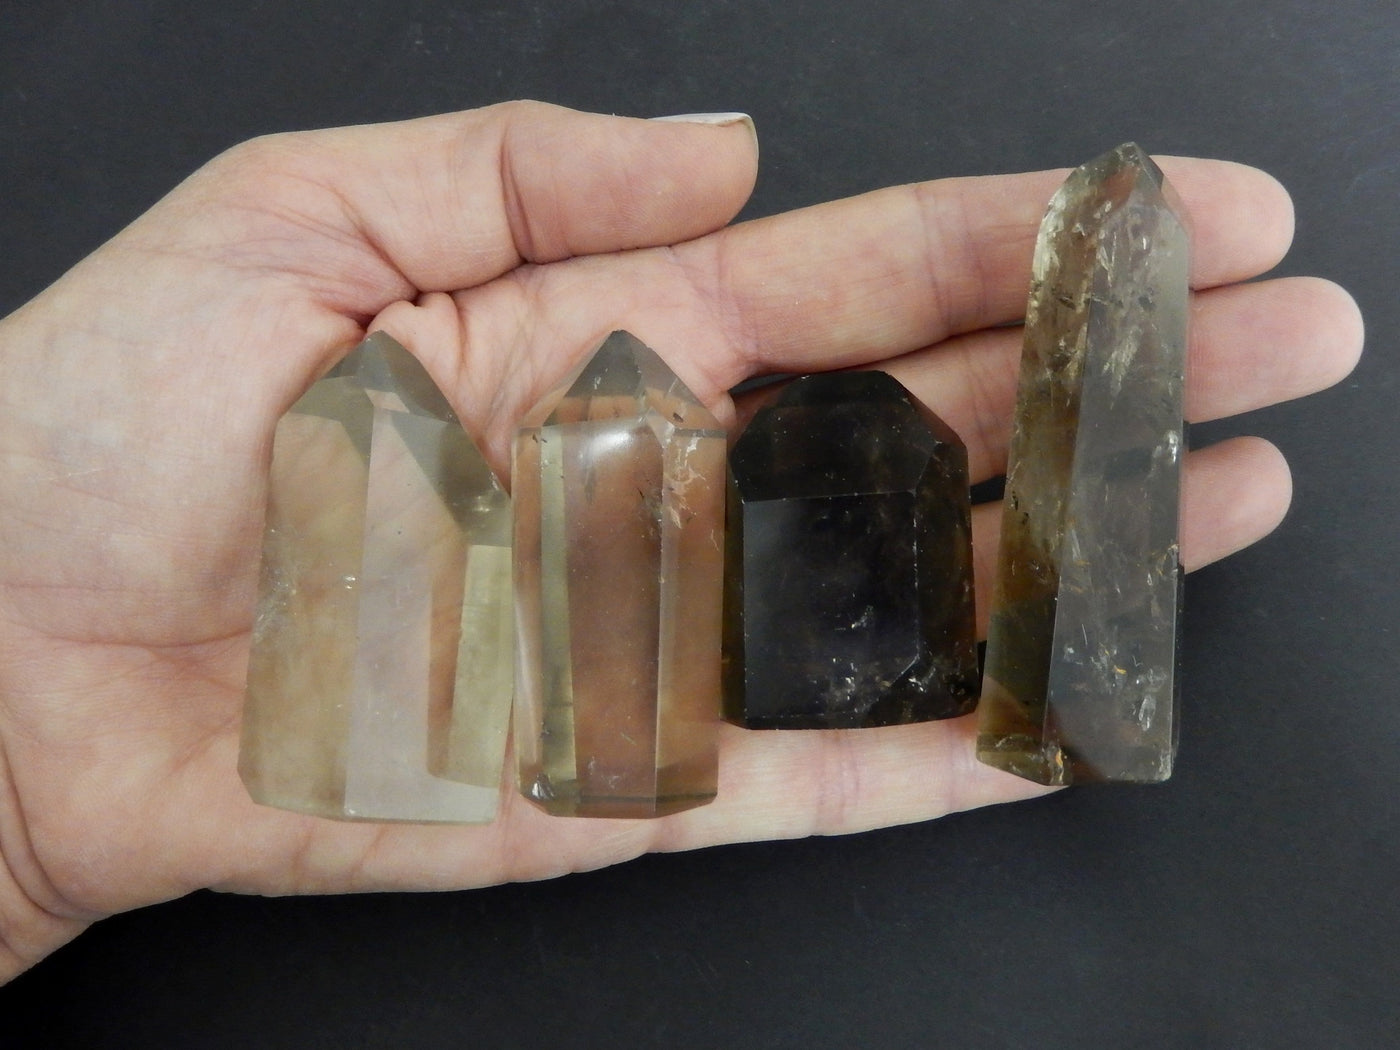 four 40g - 80g smokey quartz polished points in hand over black background for size reference and possible variations